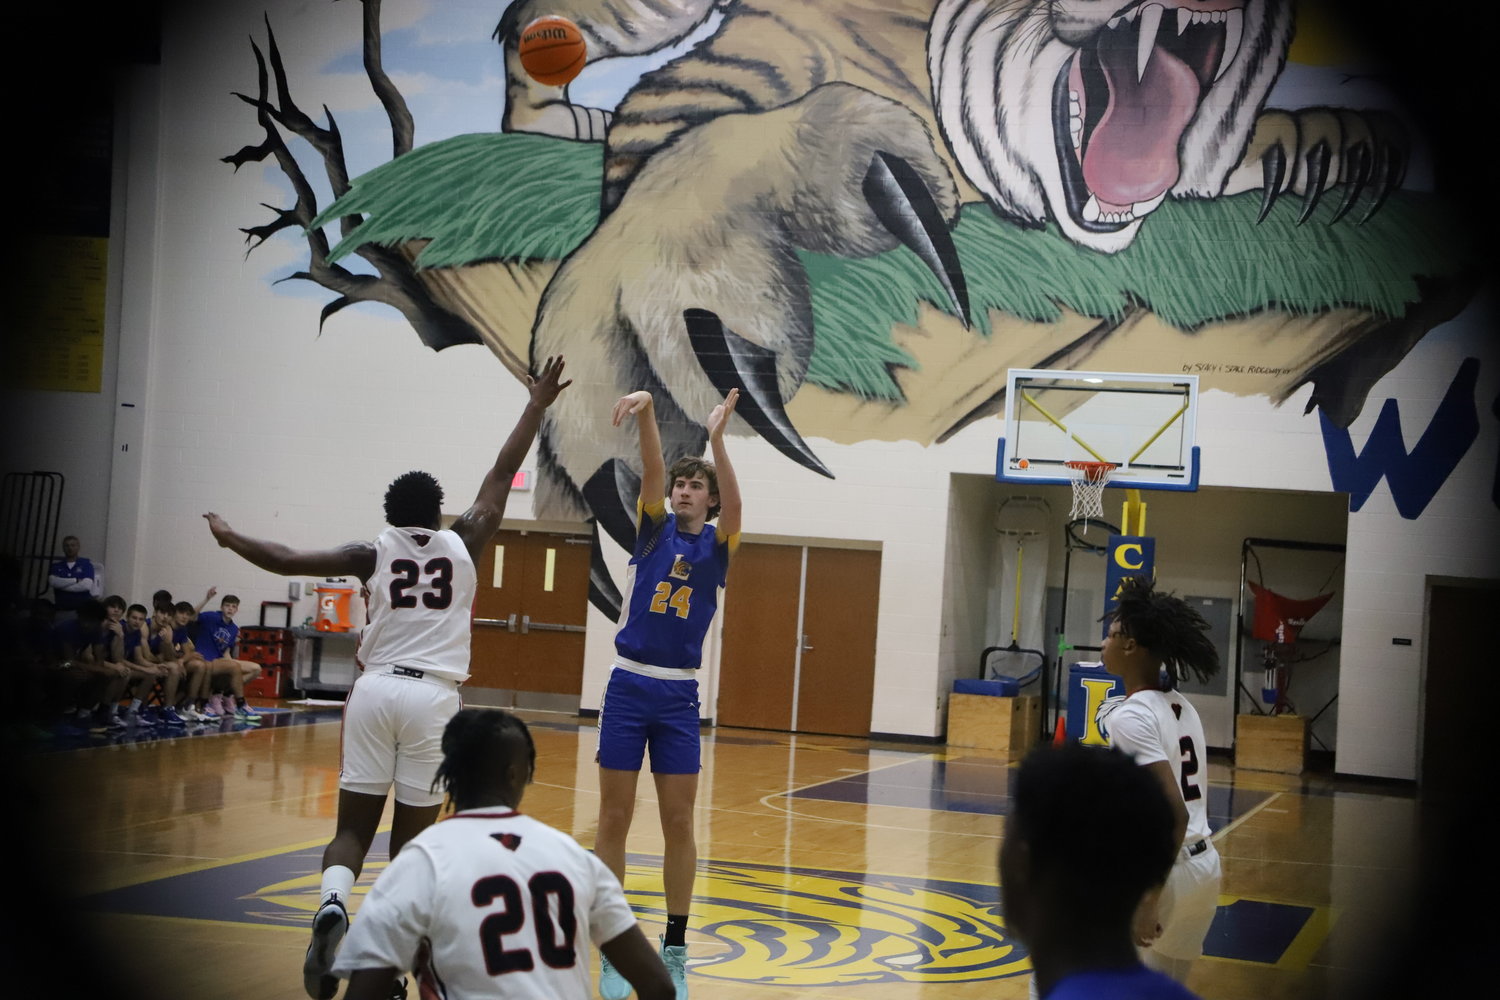 Lexington's Caleb Campbell with the jumper